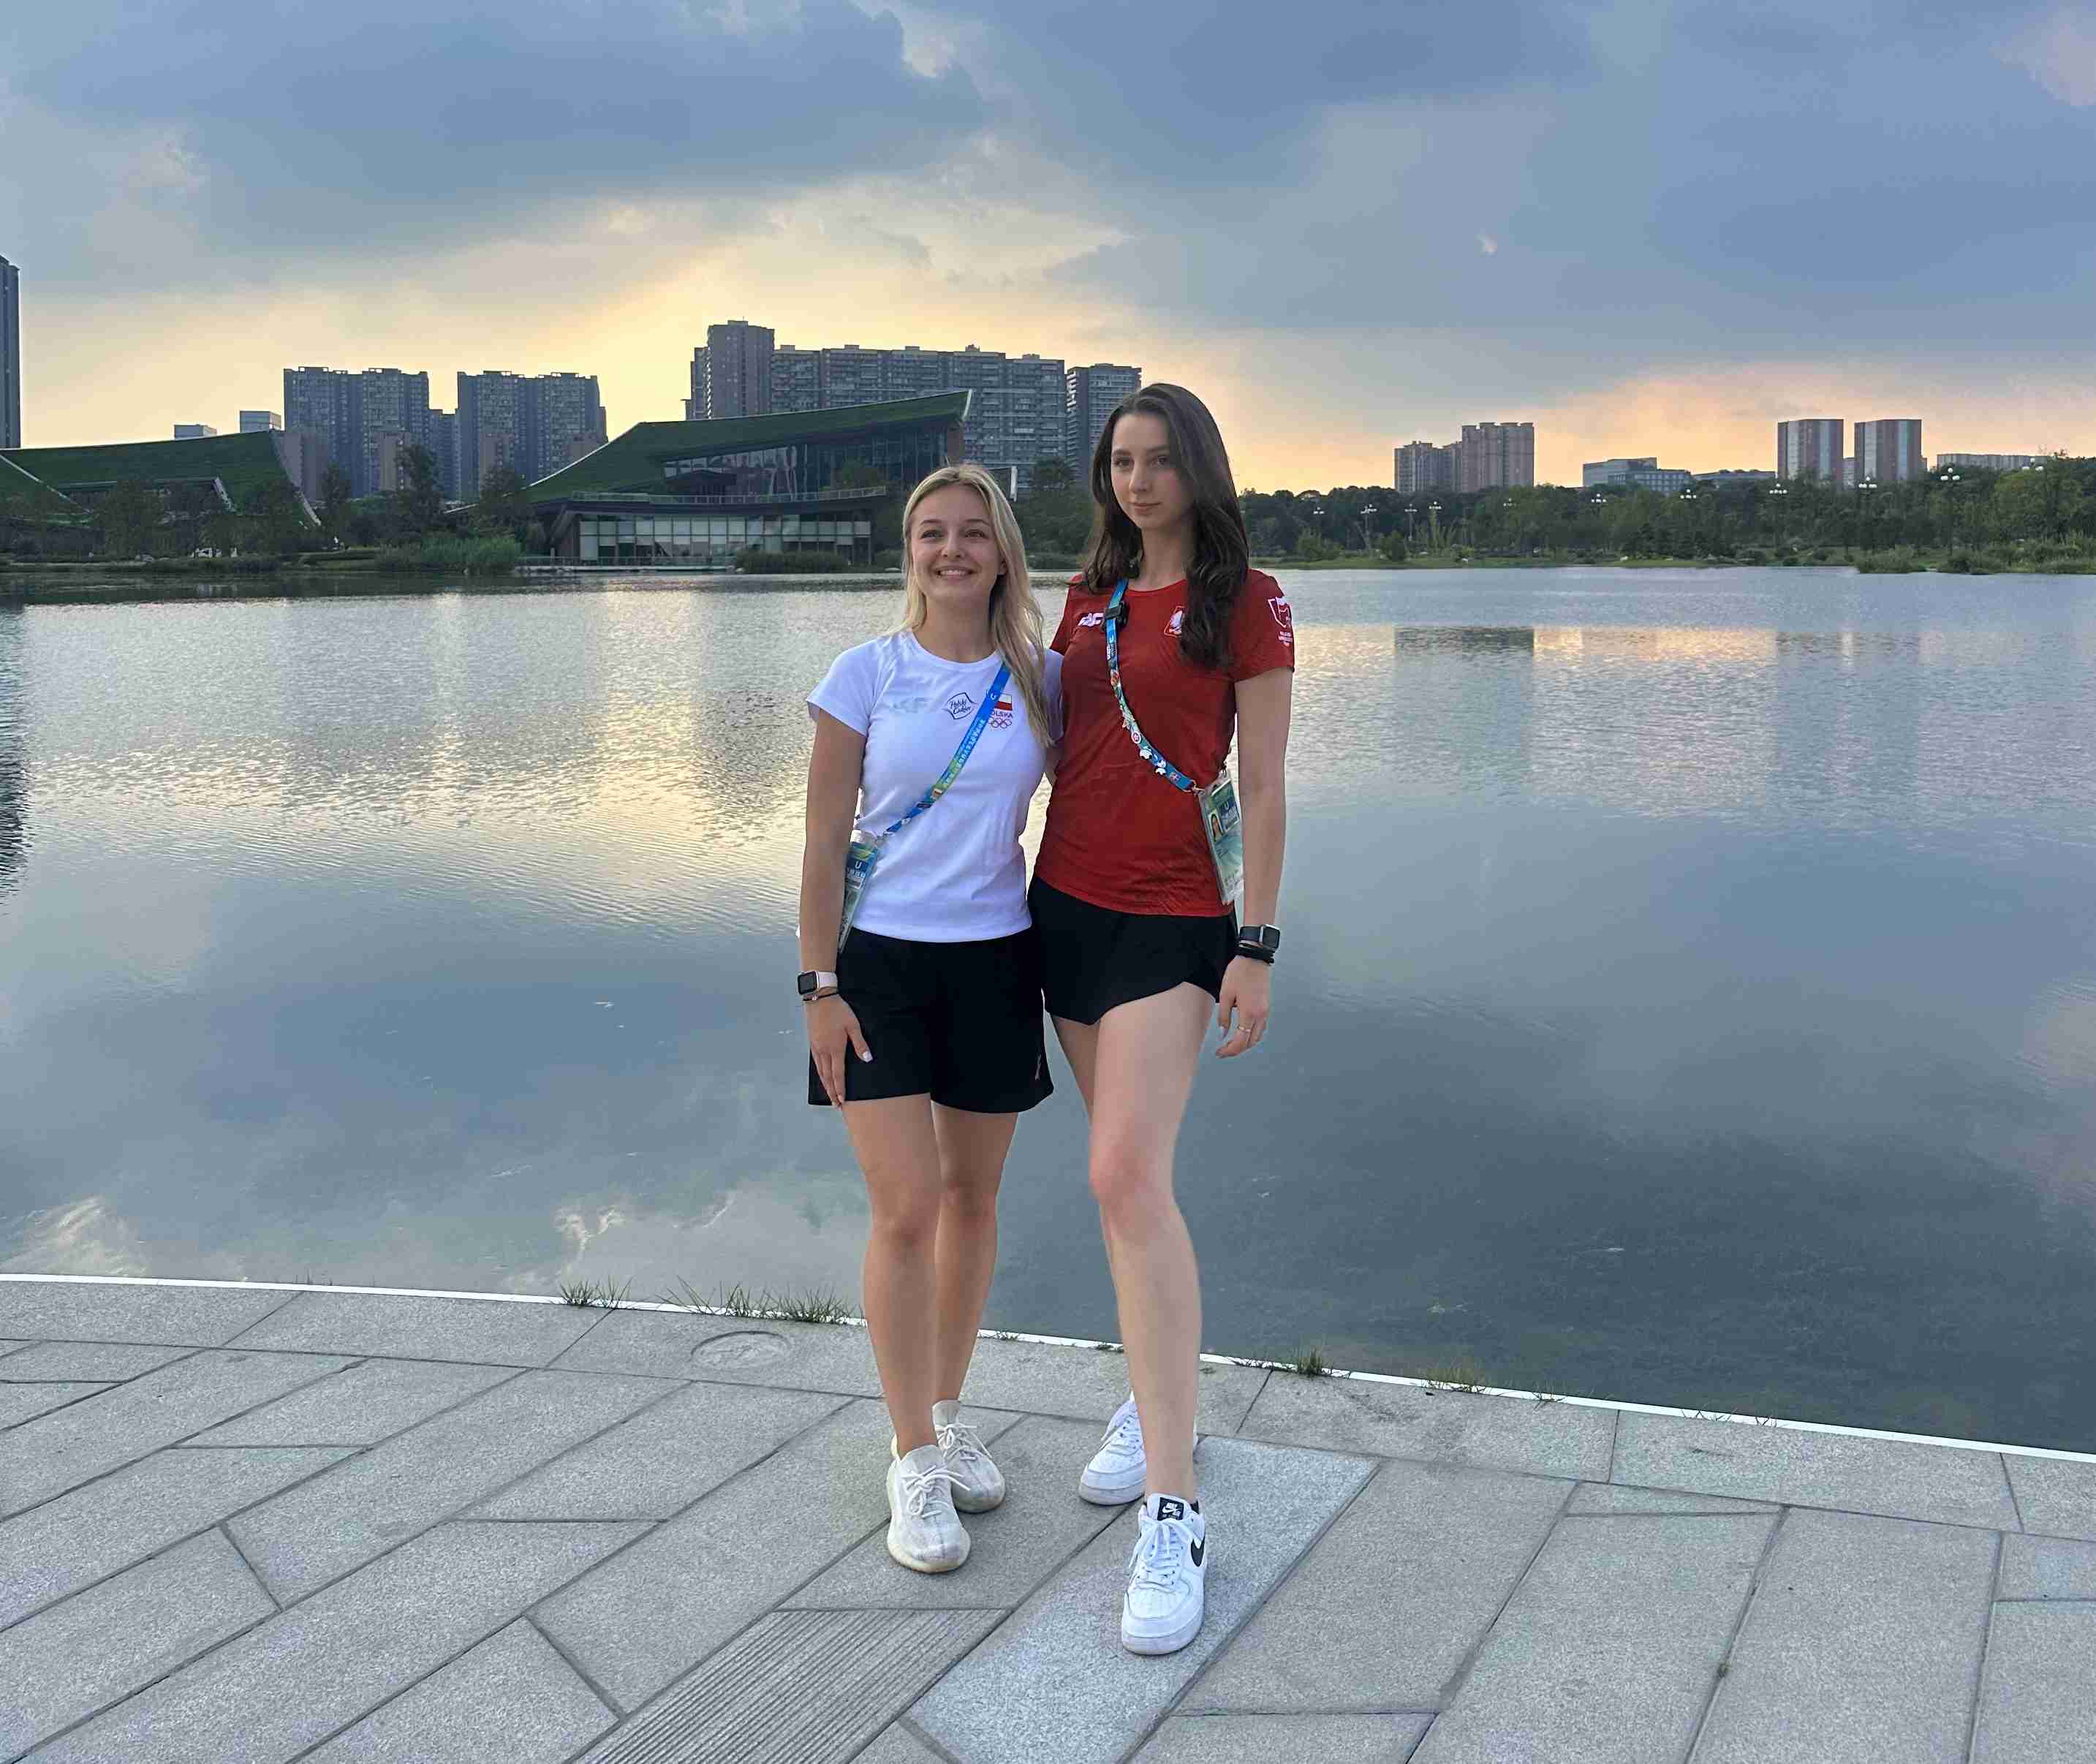 Polish Athletes Looking at Chengdu: Walking in the World Between Tradition and Modernity, Urban and Green Space | Athletes | Chengdu